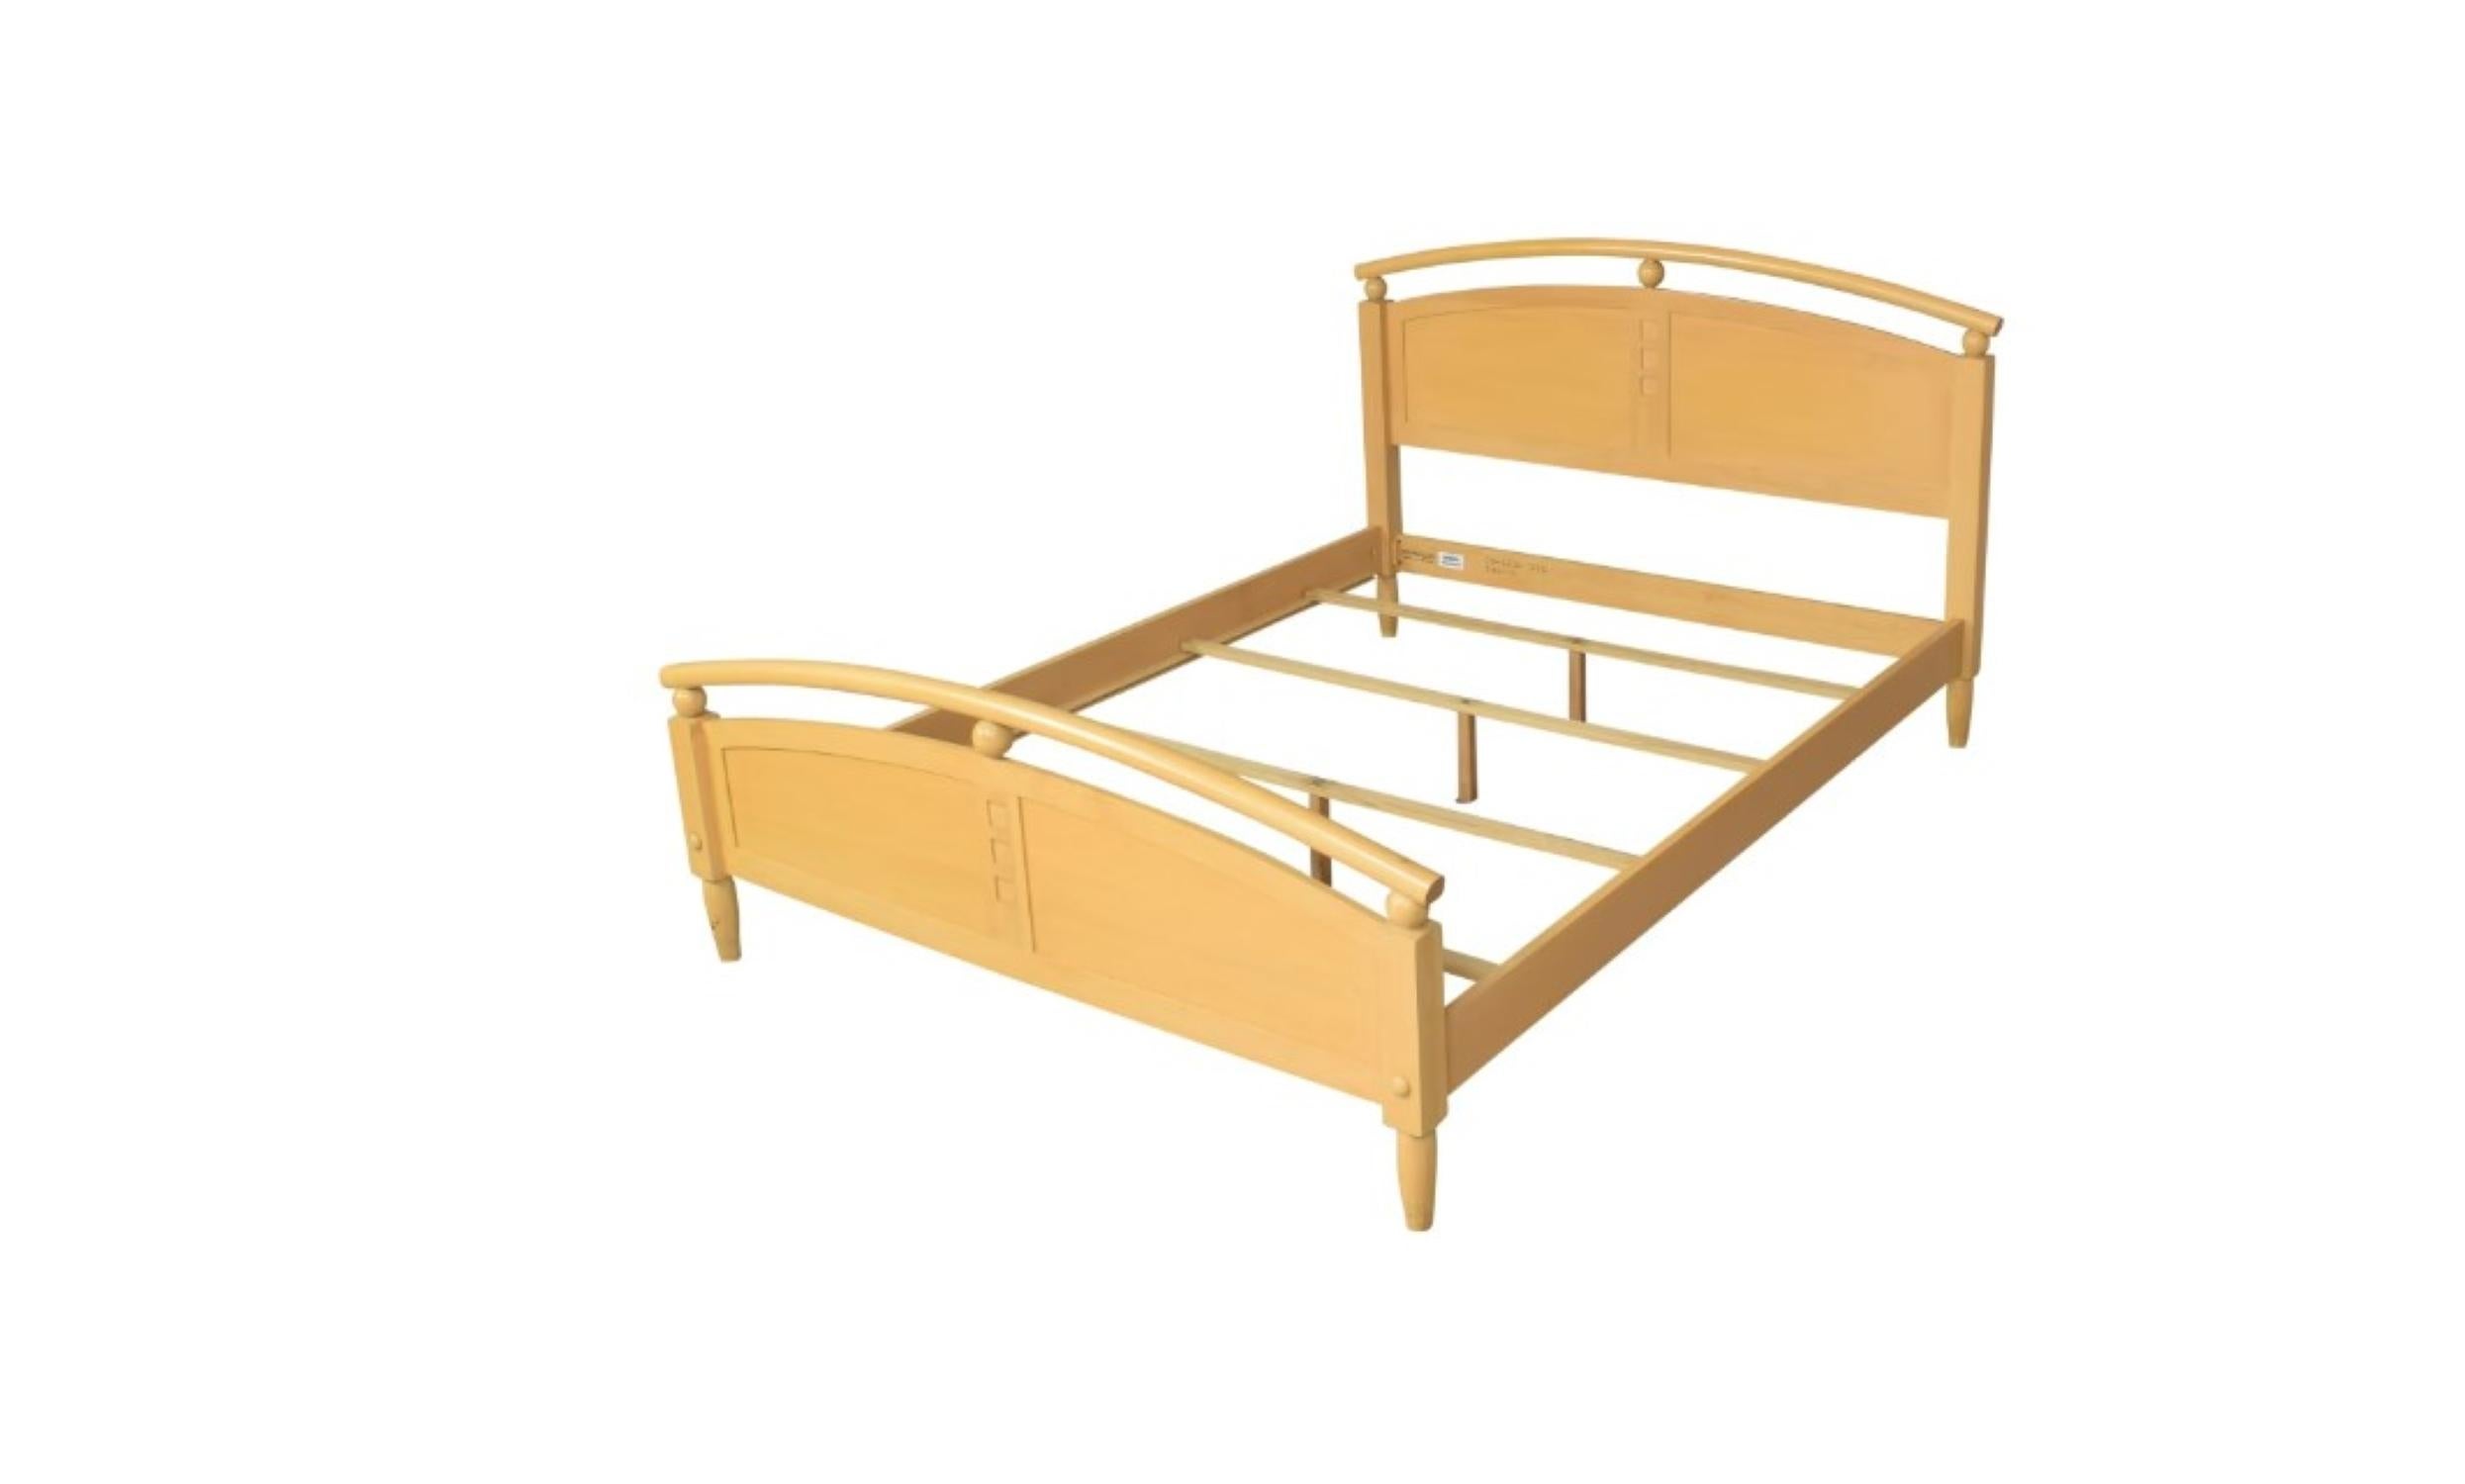 Modern Late 20th Century American Solid Birch Arch Full Size Bedstead For Sale